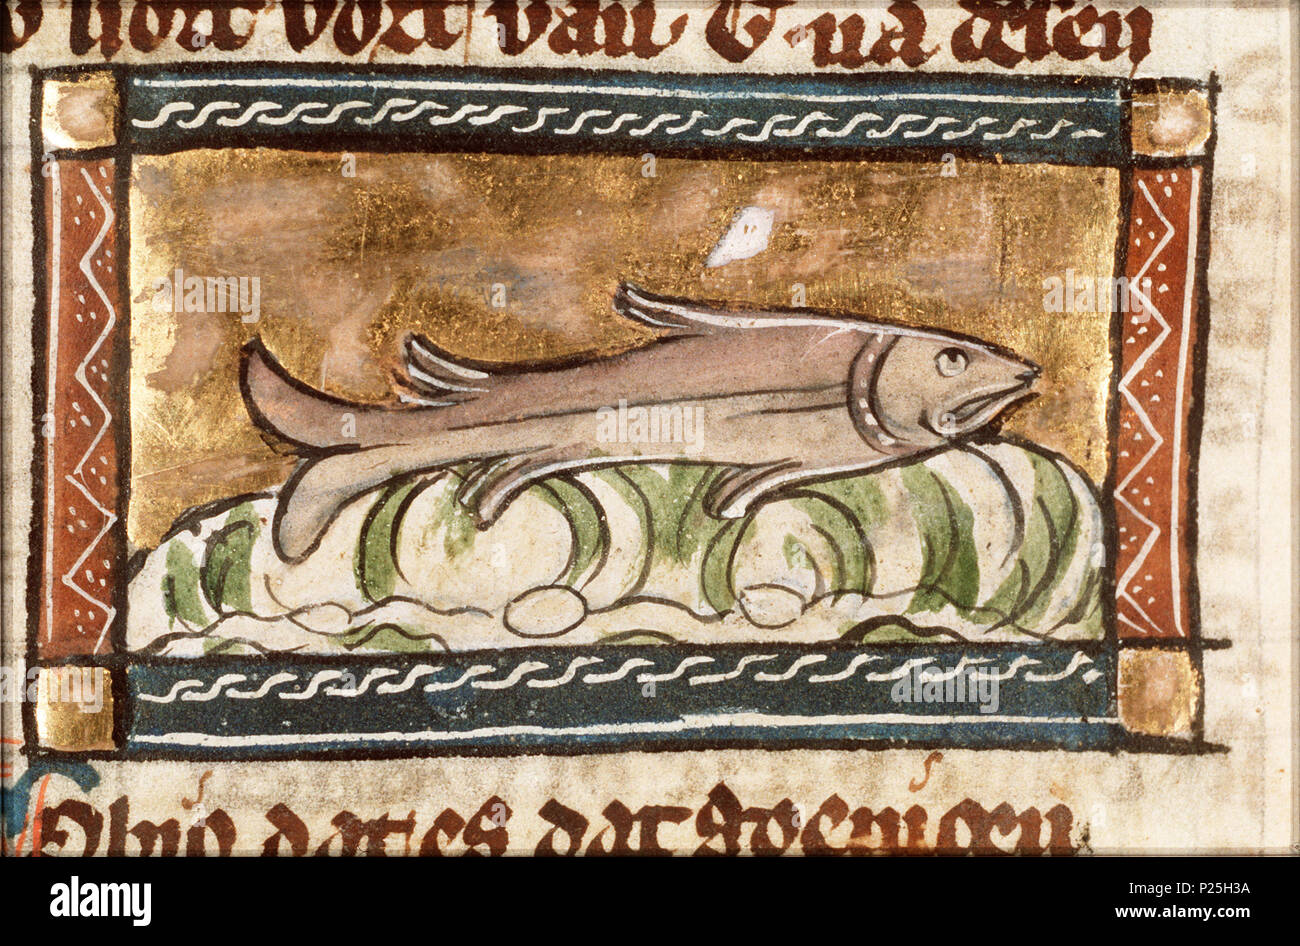 . Gobio (gudgeon kind of fish) - miniature from folio 115v from Der naturen bloeme (KB KA 16) by Jacob van Maerlant .  Gobio (gudgeon kind of fish) - miniature from folio 115v from Der naturen bloeme (KB KA 16) by Jacob van Maerlant Topics depicted in this miniature Bony fishes (gudgeon) (25F62(GUDGEON))   This miniature is part of the lefthand side folio 115v  . between circa 1340 and circa 1350.    Thomas of Cantimpré  (1201–1270)    Alternative names Thomas of Cantimpre  Description hagiographer, writer and priest  Date of birth/death 1201 1270  Location of birth Sint-Pieters-Leeuw  Authori Stock Photo